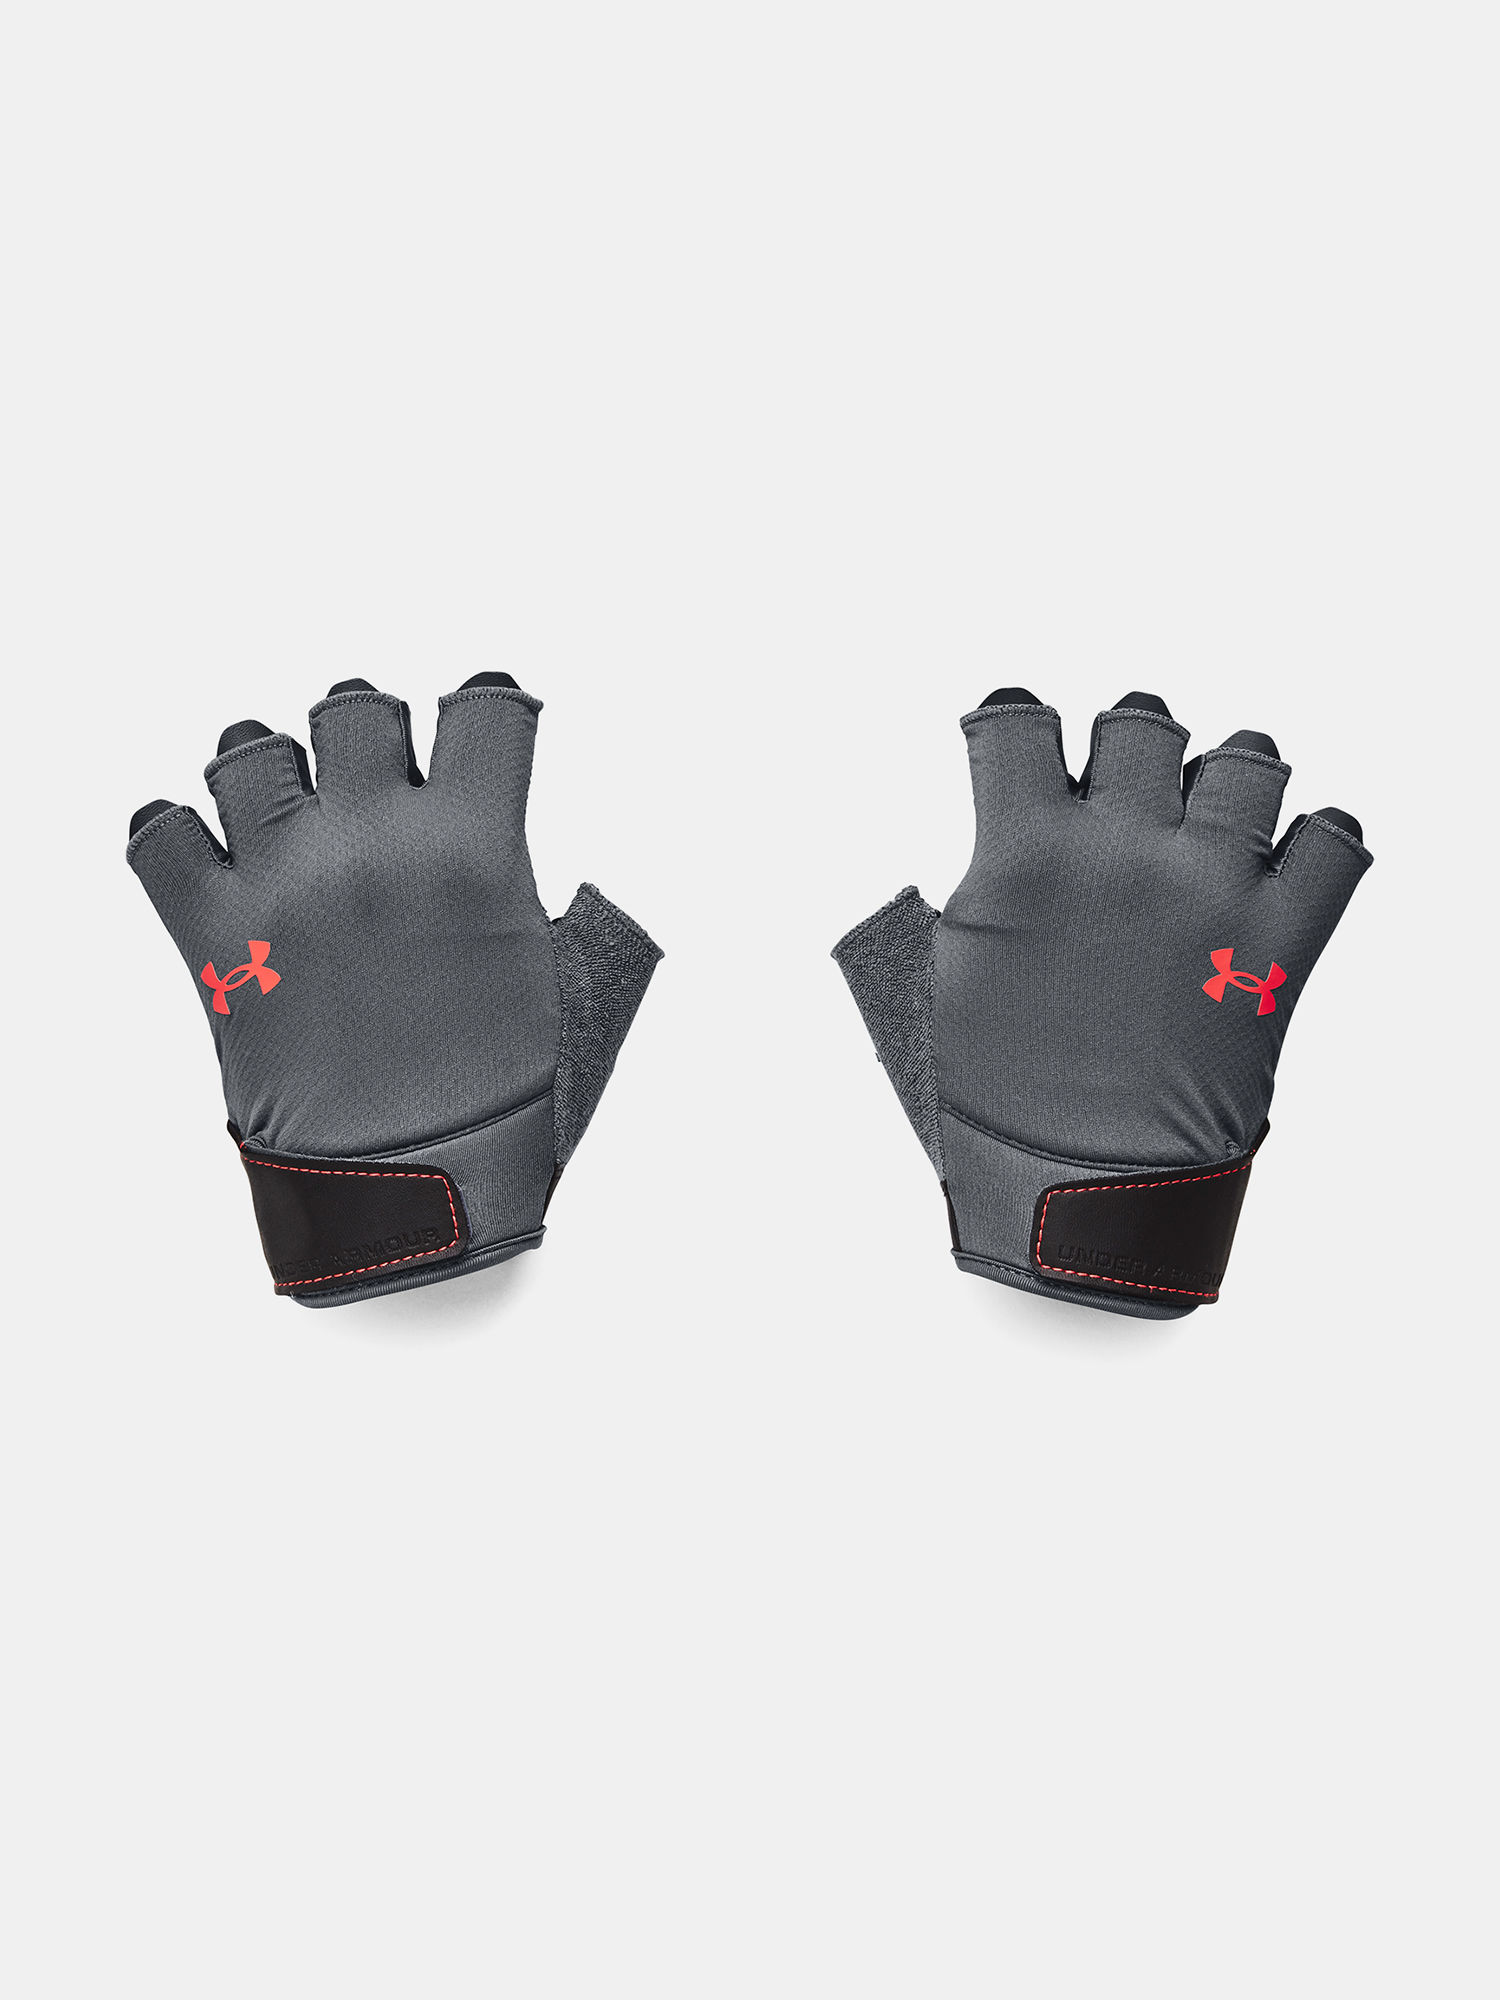 Rukavice Under Armour M's Training Gloves-GRY (1)